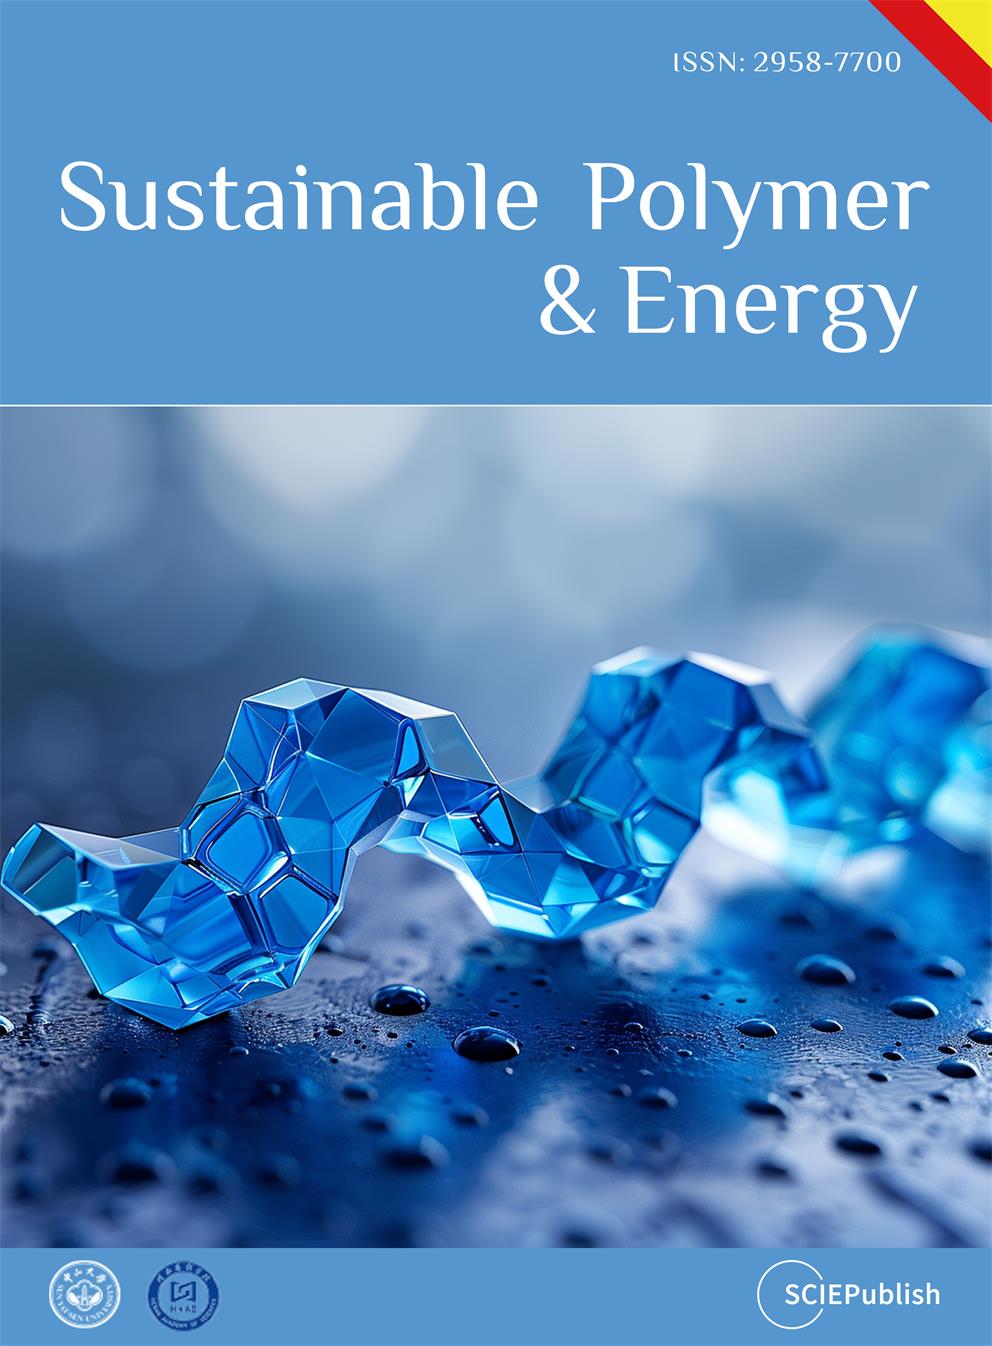 Sustainable Polymer & Energy